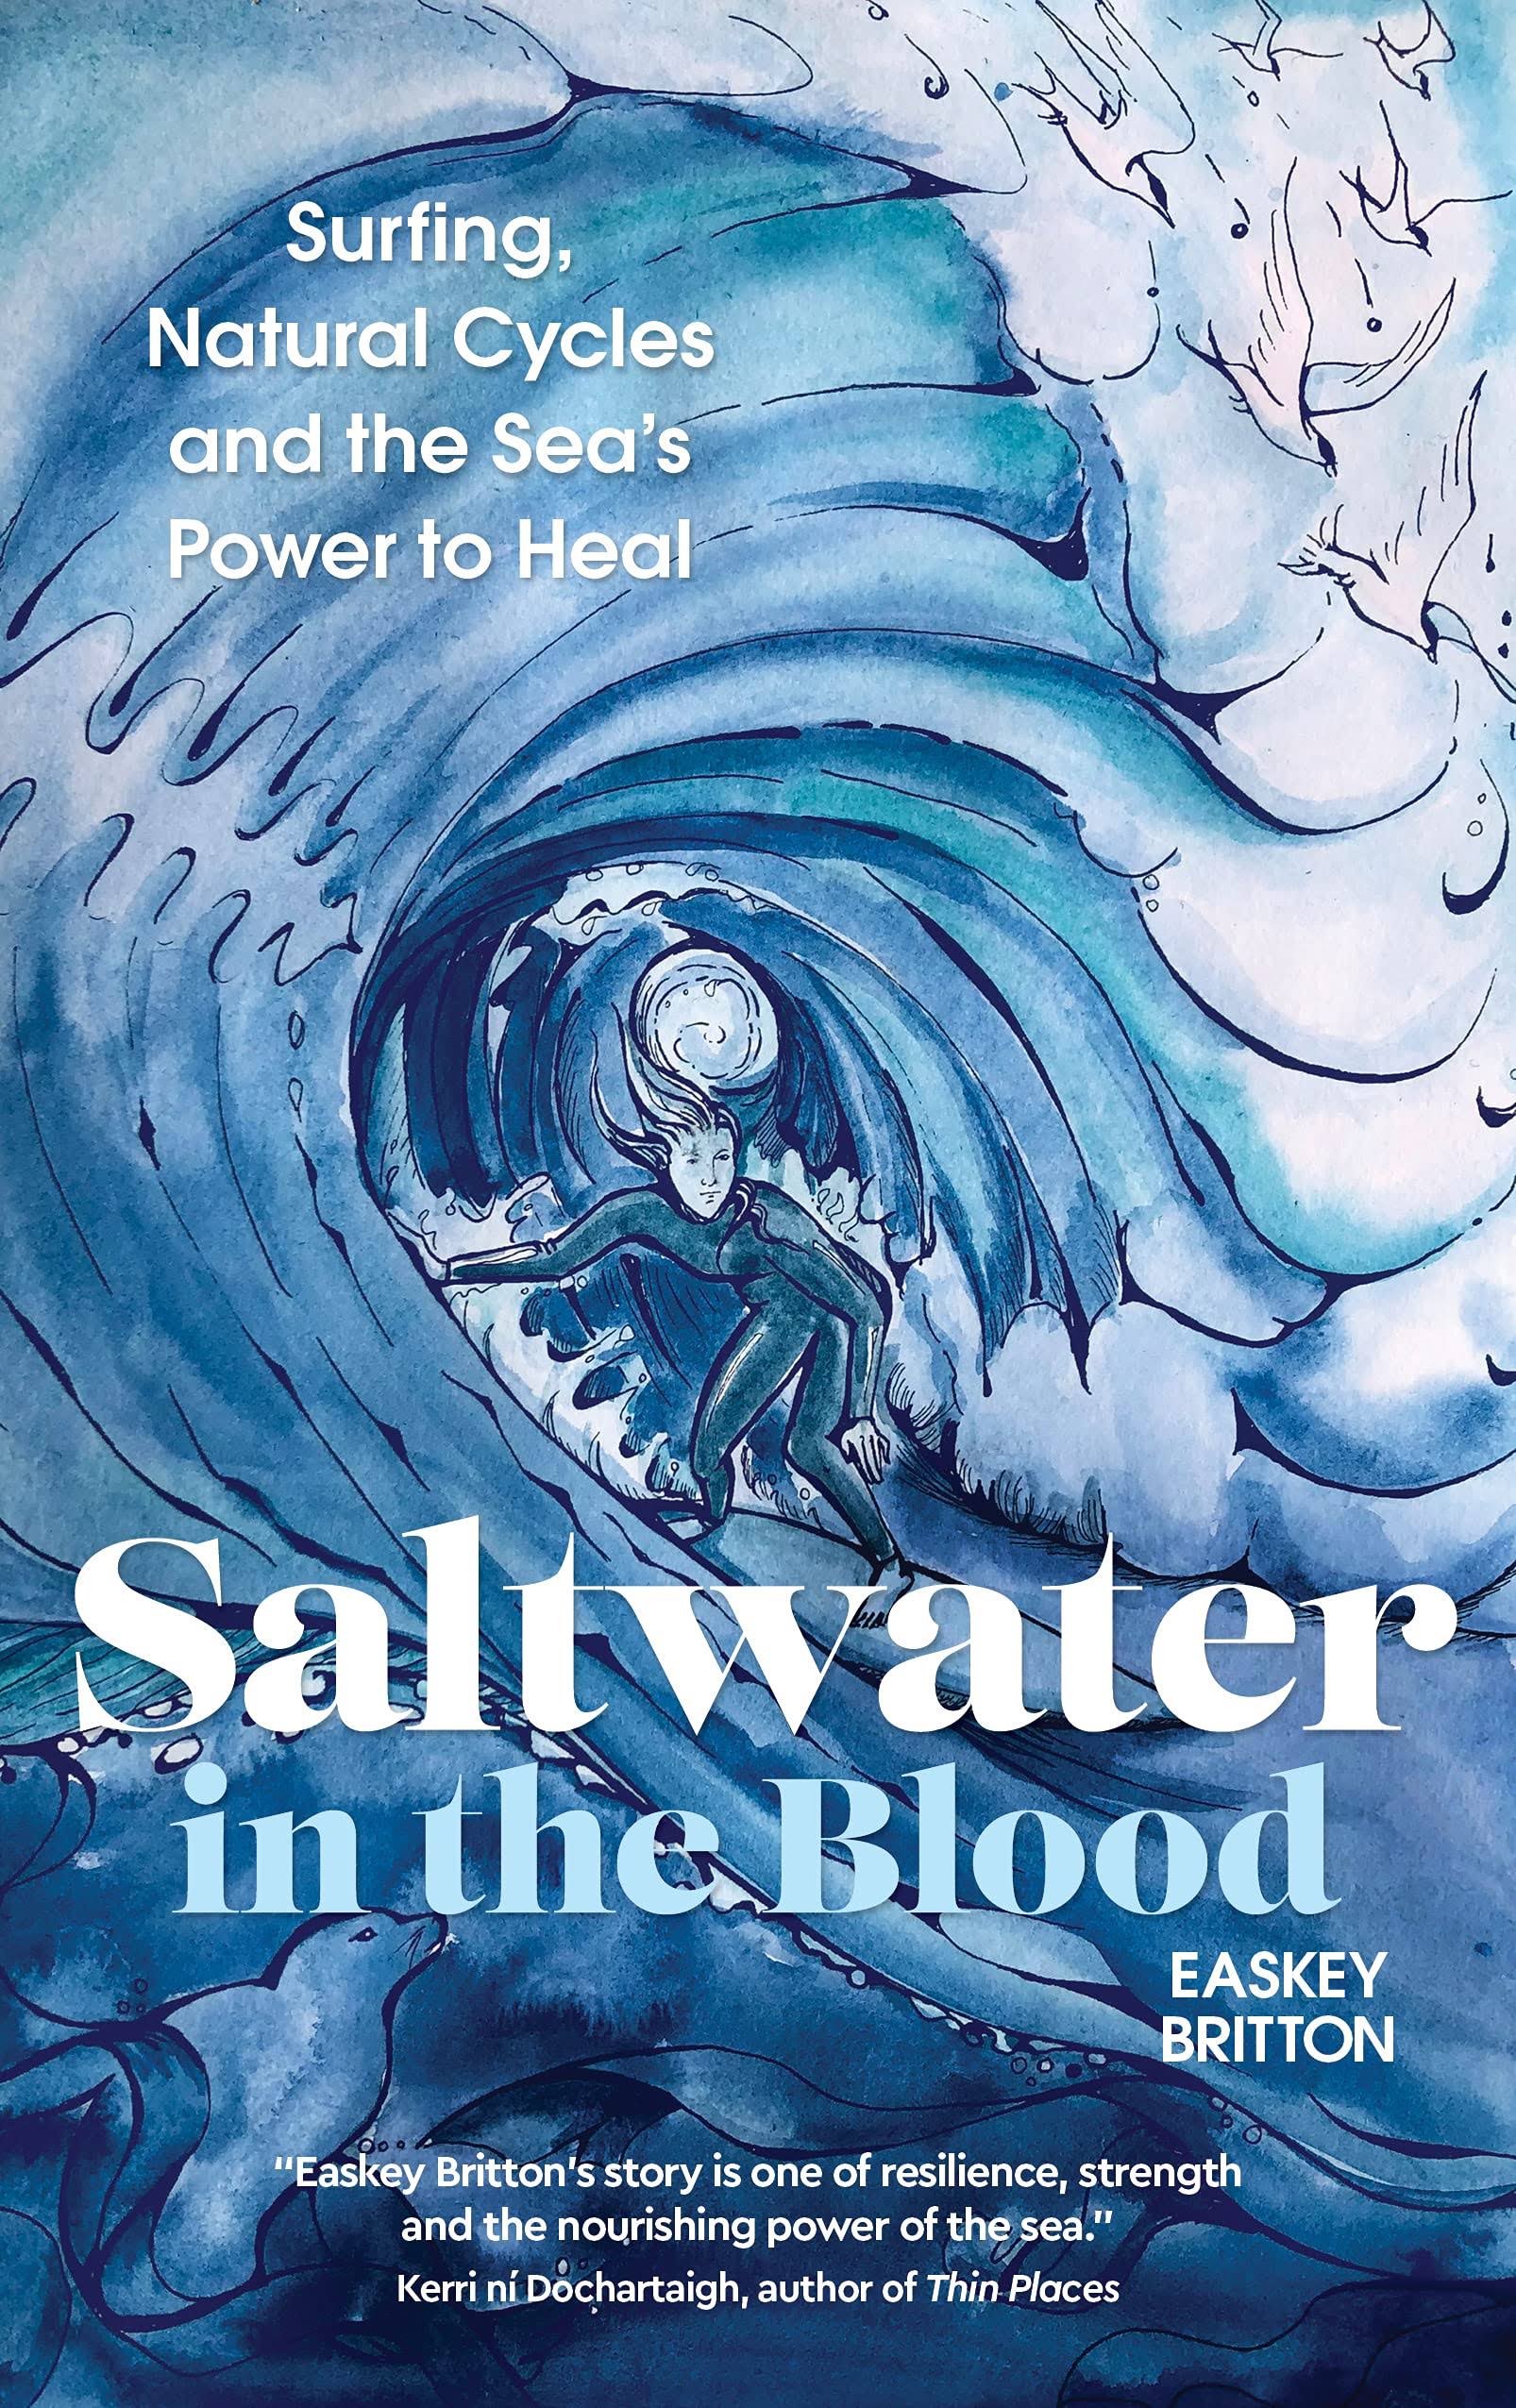 Saltwater in the Blood: Surfing, Natural Cycles and the Sea's Power to Heal [Book]